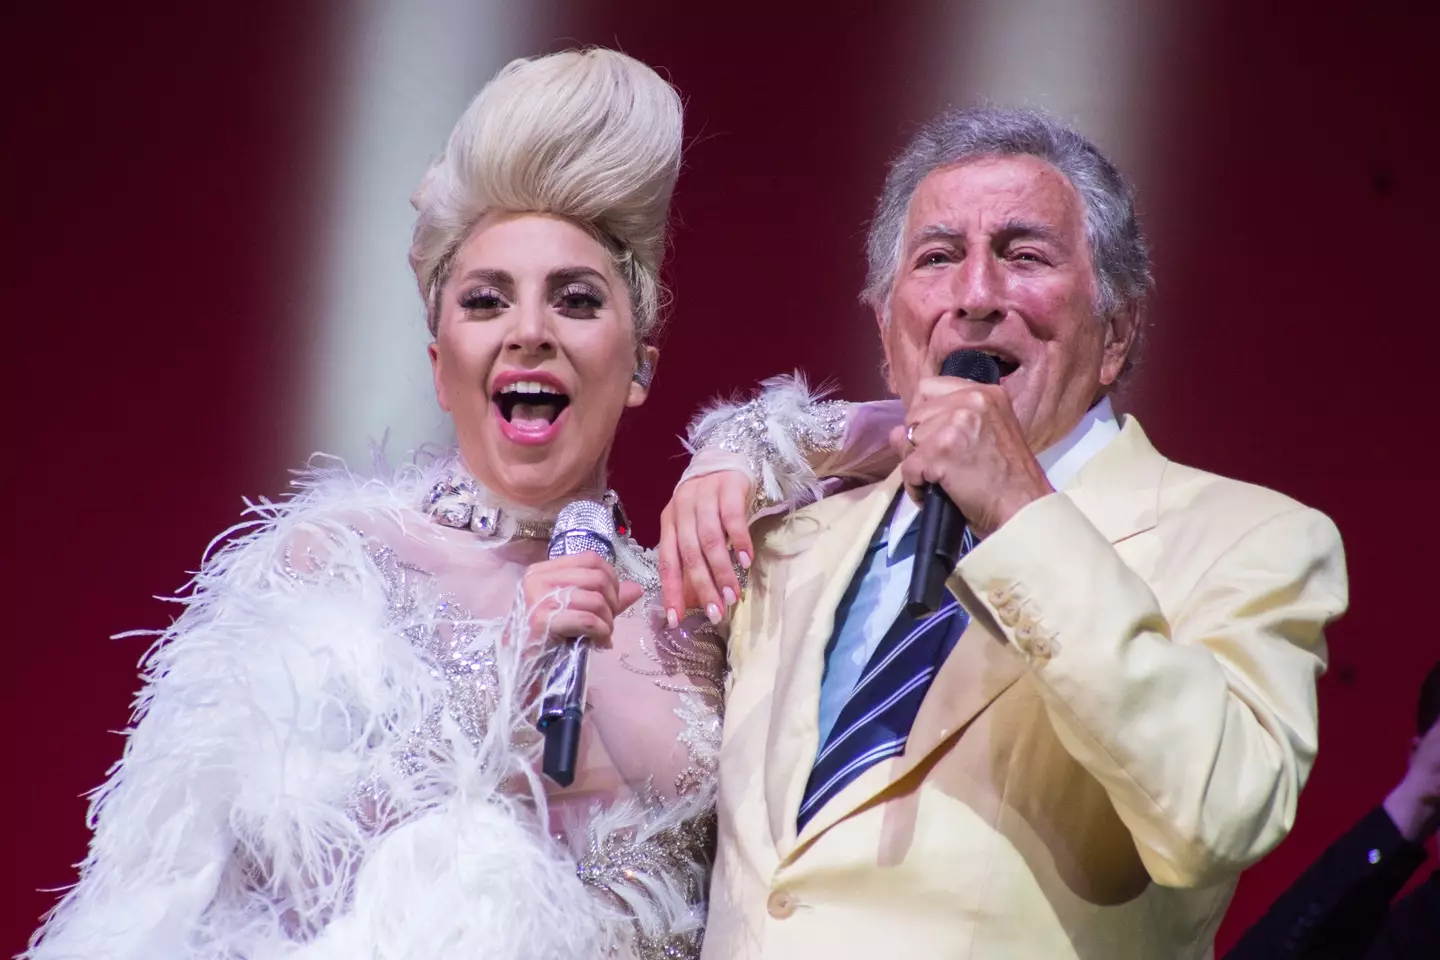 Tony Bennett released two albums with Lady Gaga.